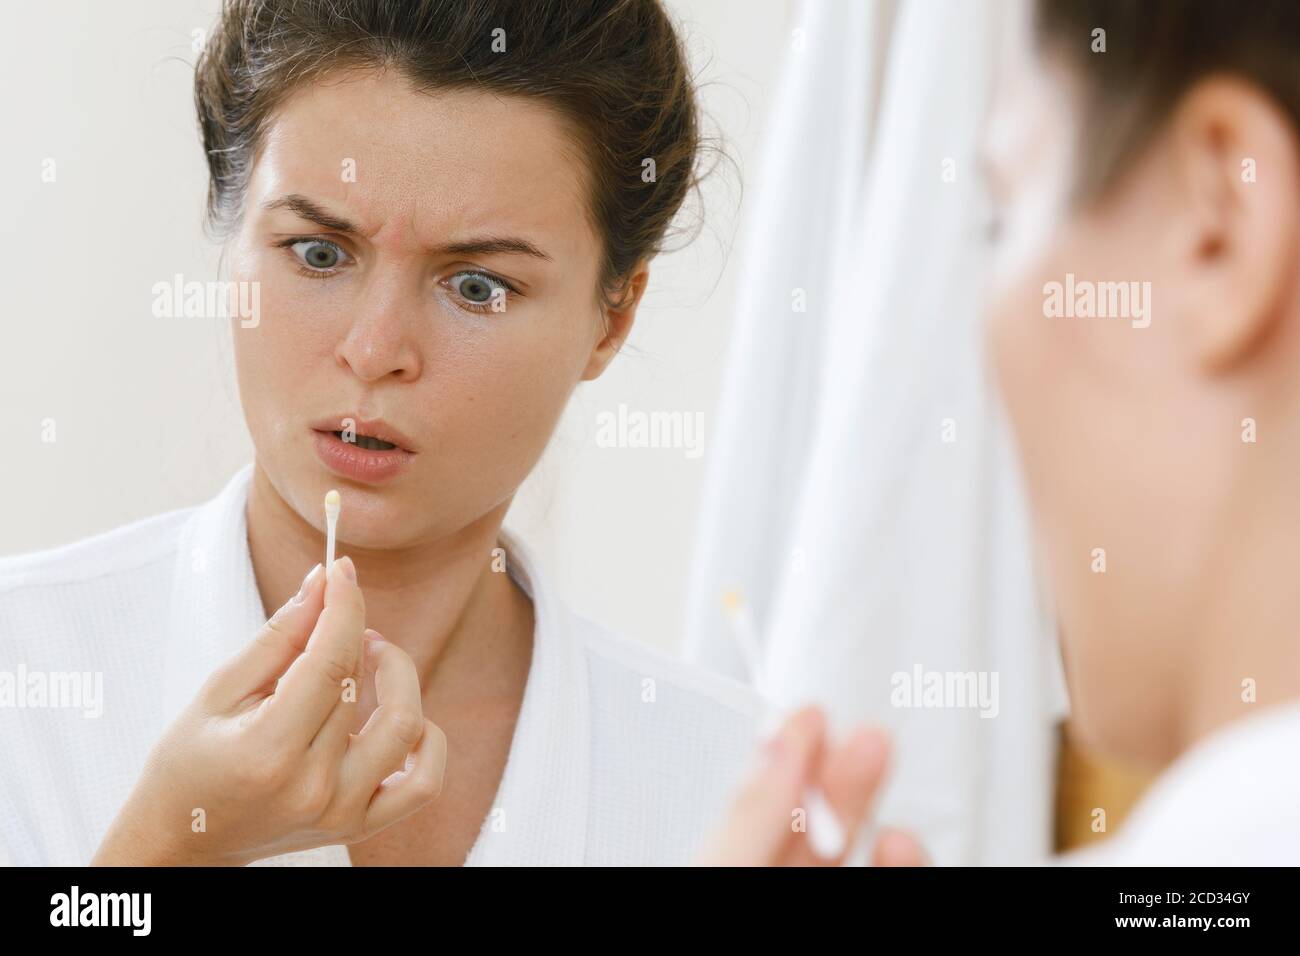 Woman cleansing her ears with a cotton swab in the bathroom Stock Photo